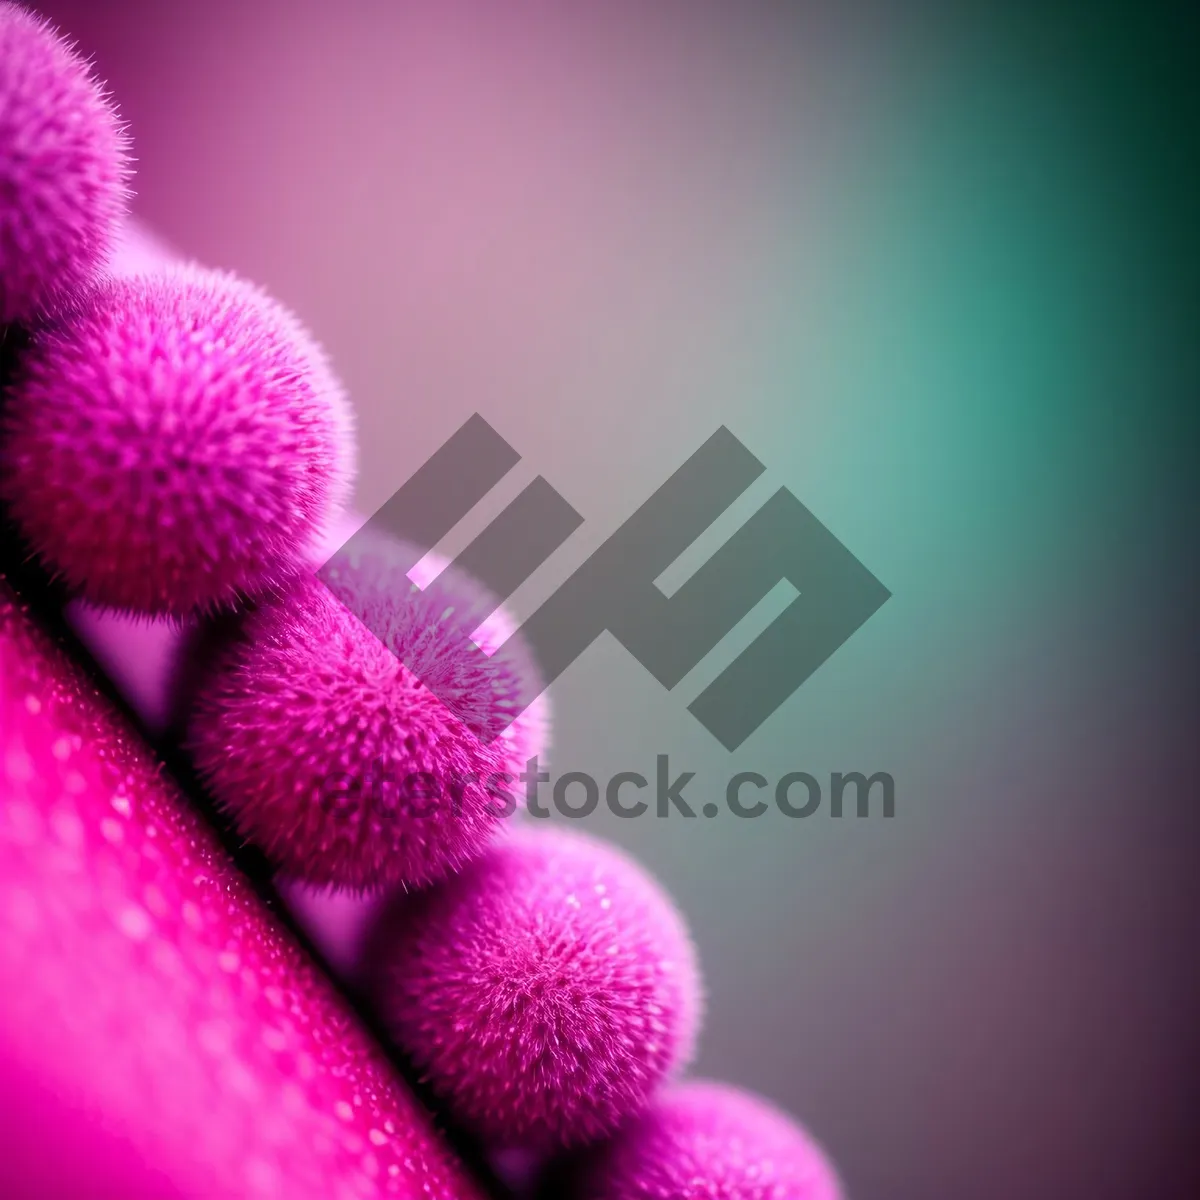 Picture of Pink Flower Close-Up with Bacteria